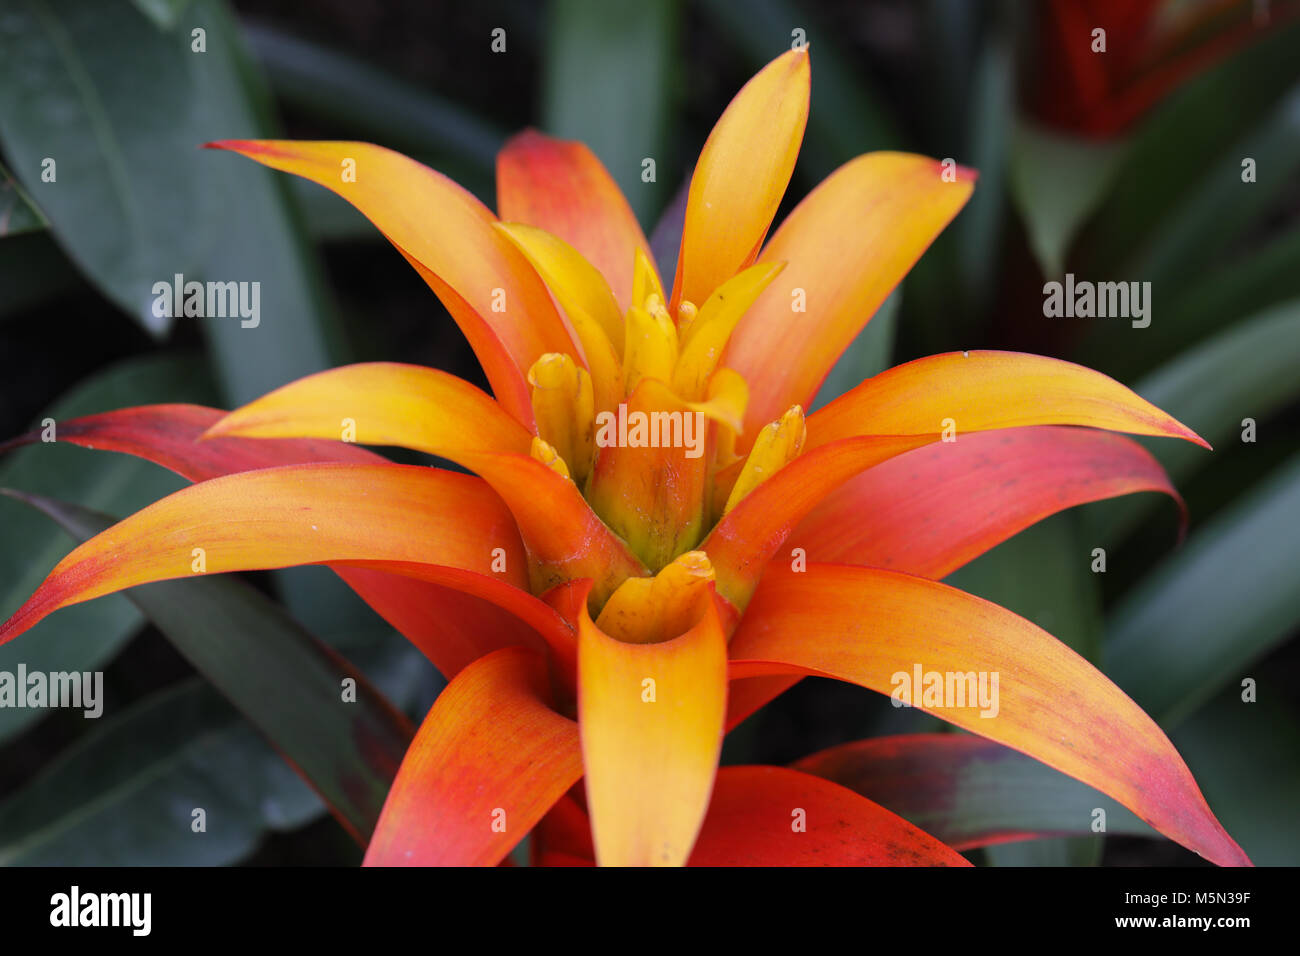 Beautiful Orange succulent in the Bromeliad family.  This close up image of a monocot flowering plant is better known as Orange Sun Bromeliad. Stock Photo